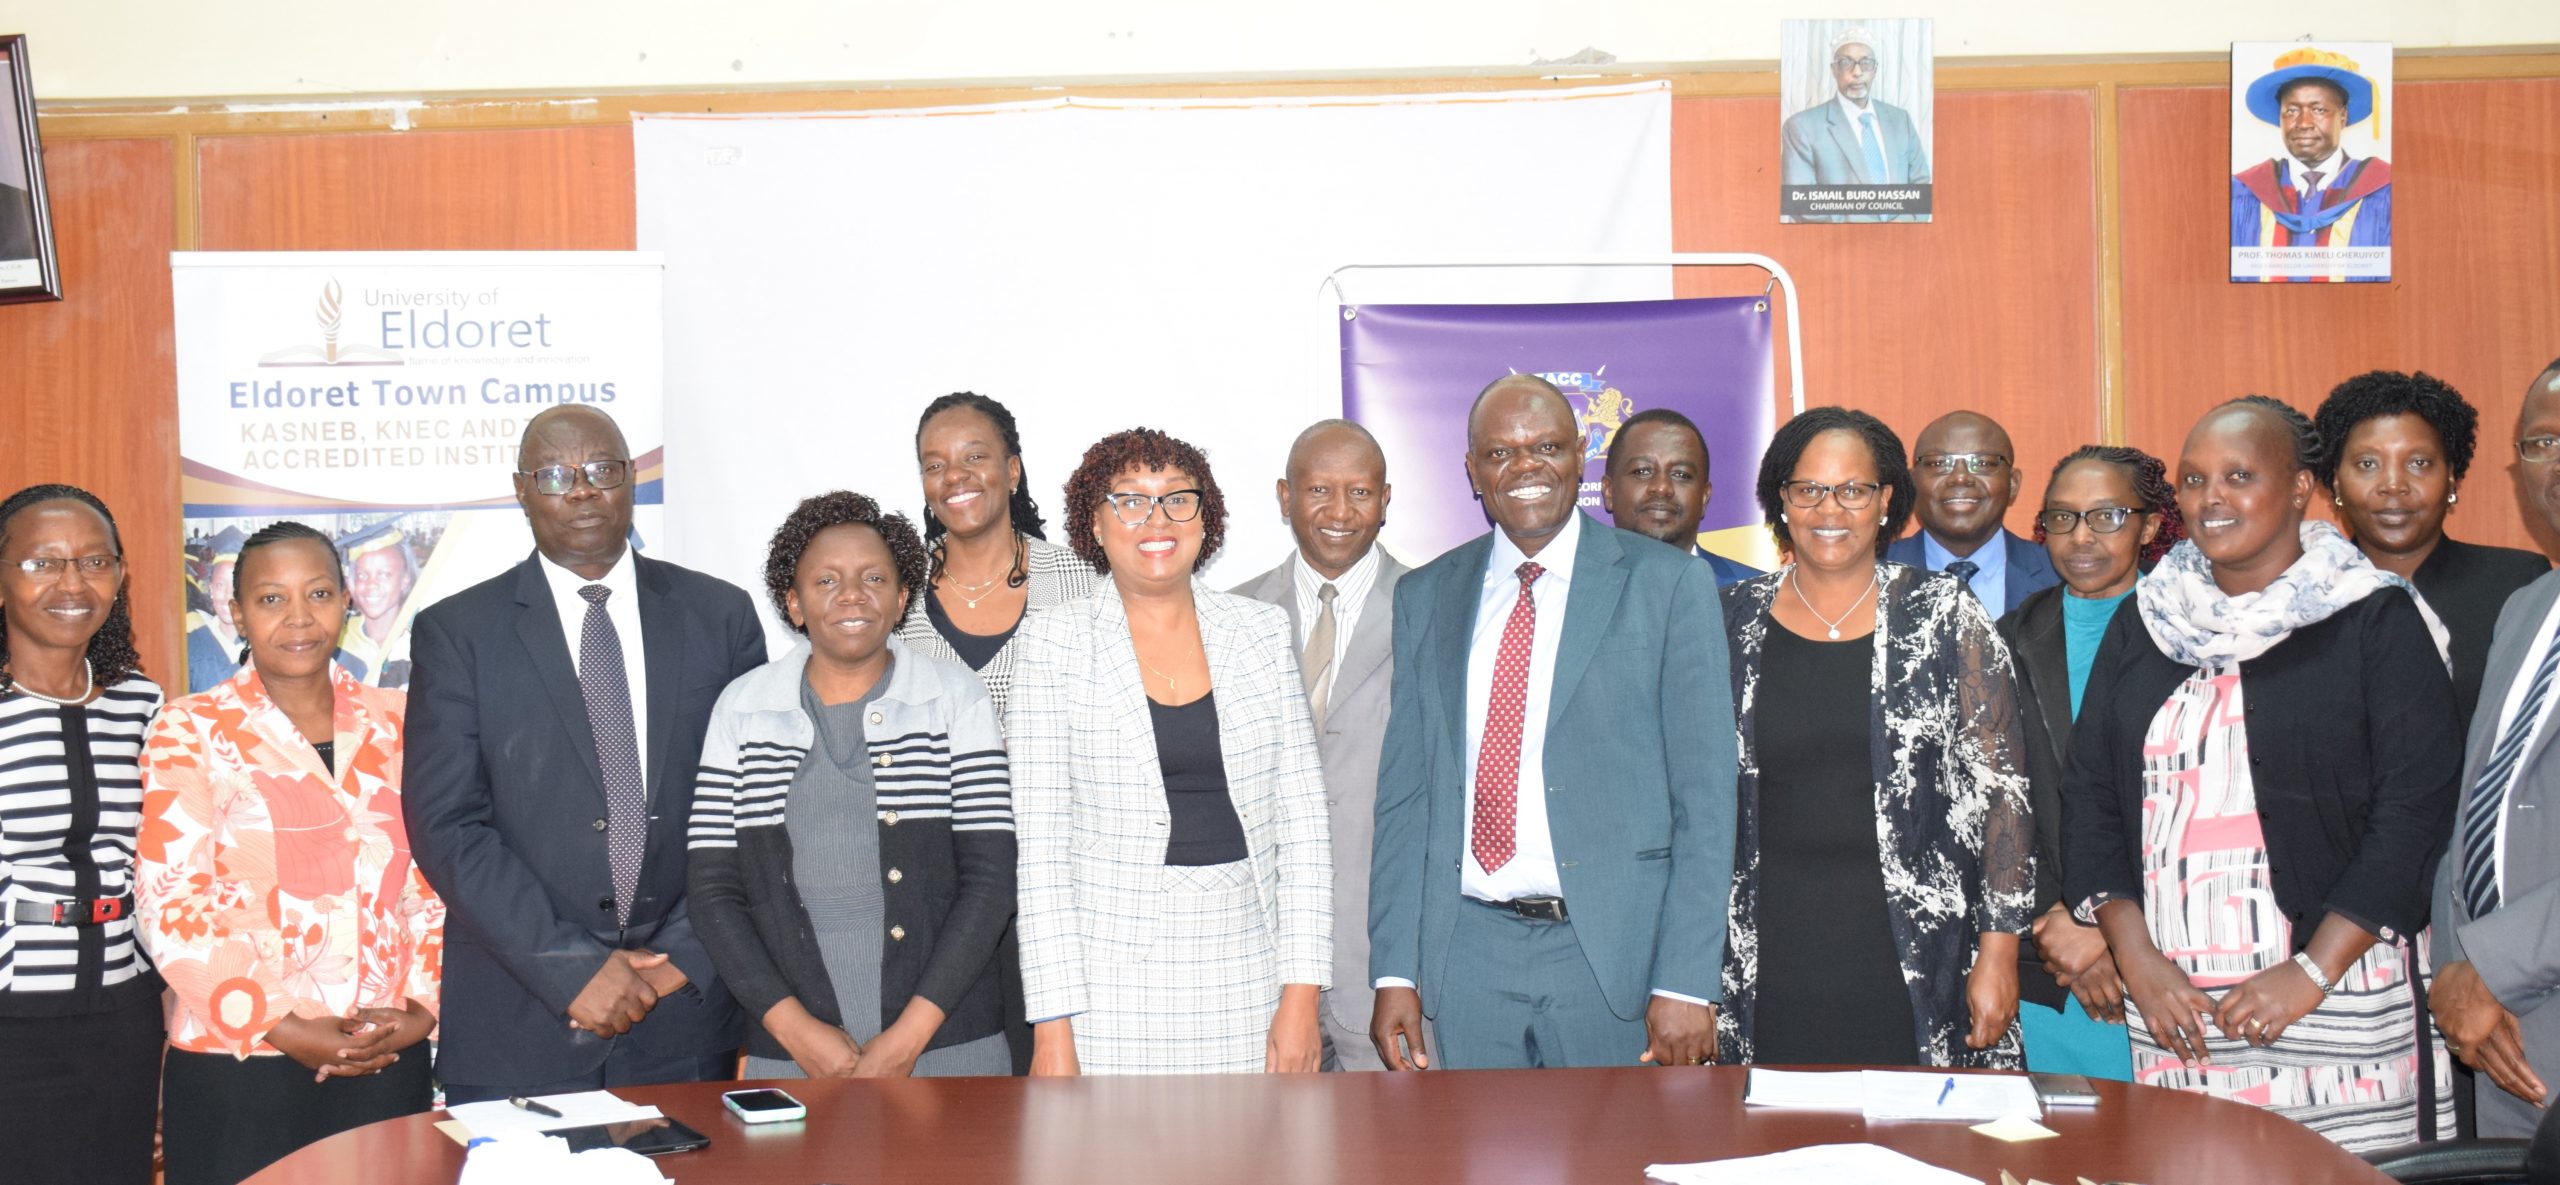 EACC Conducts capacity building programme for University of Eldoret Staff